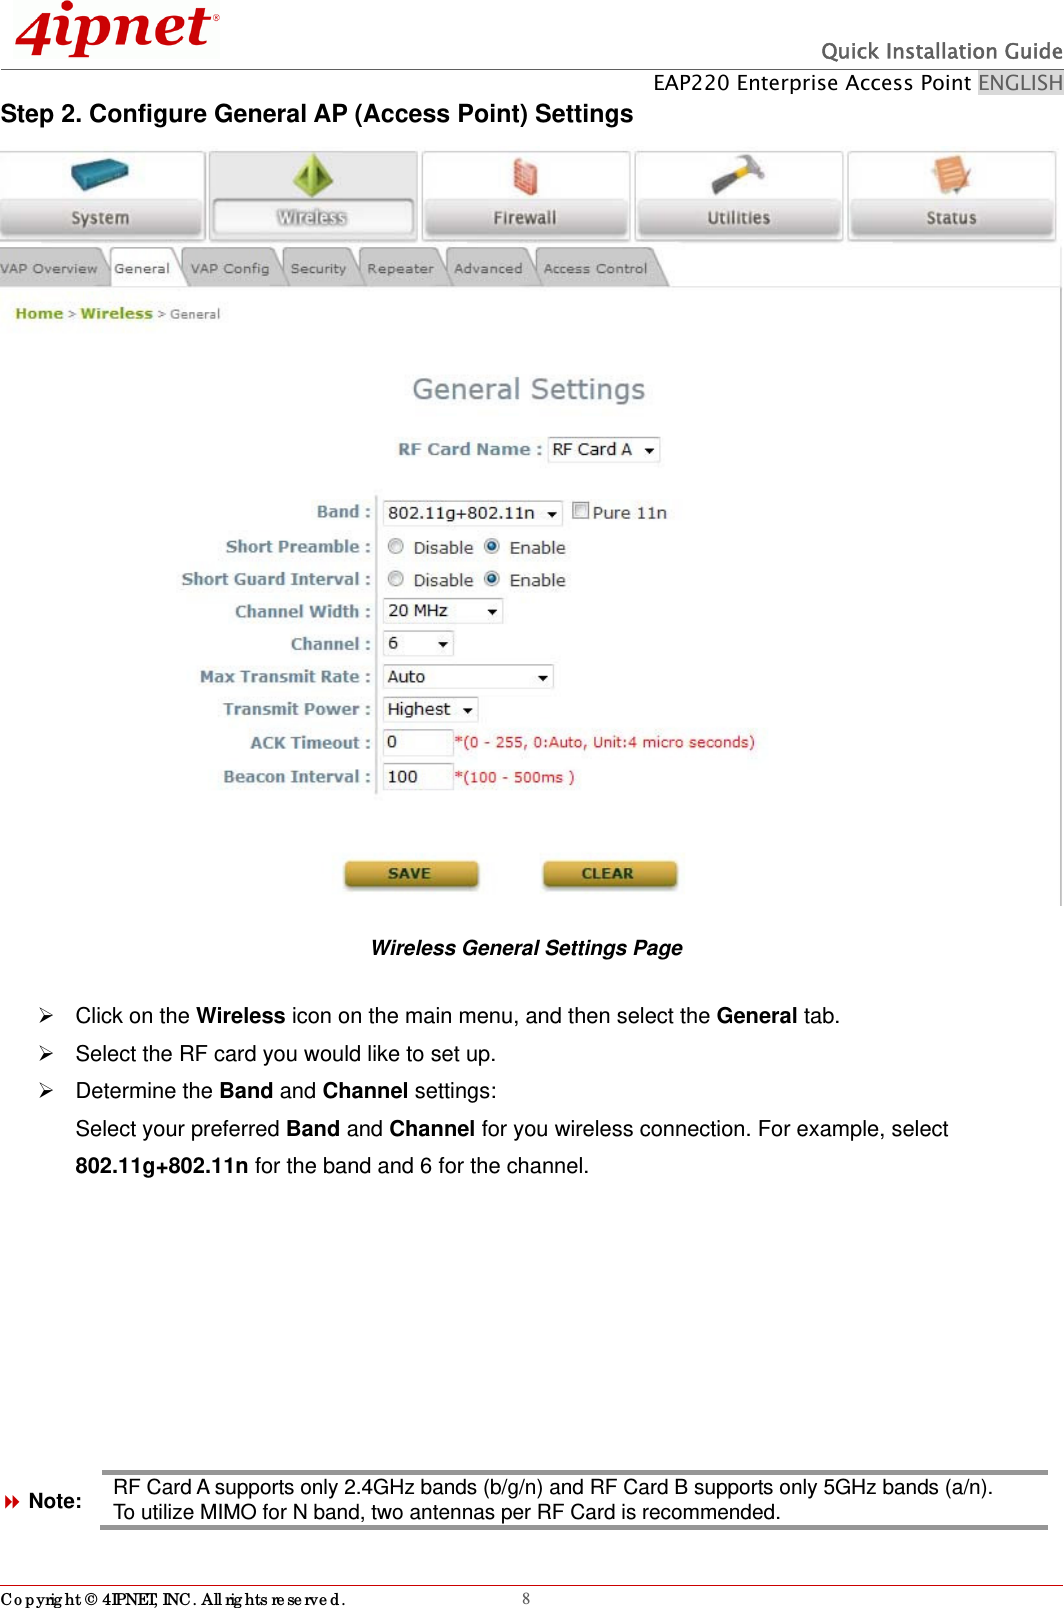  Quick Installation Guide EAP220 Enterprise Access Point ENGLISH Copyright © 4IPNET, INC. All rights reserved.                                                              8Step 2. Configure General AP (Access Point) Settings  Wireless General Settings Page   Click on the Wireless icon on the main menu, and then select the General tab.   Select the RF card you would like to set up.    Determine the Band and Channel settings: Select your preferred Band and Channel for you wireless connection. For example, select 802.11g+802.11n for the band and 6 for the channel.      Note: RF Card A supports only 2.4GHz bands (b/g/n) and RF Card B supports only 5GHz bands (a/n).   To utilize MIMO for N band, two antennas per RF Card is recommended. 